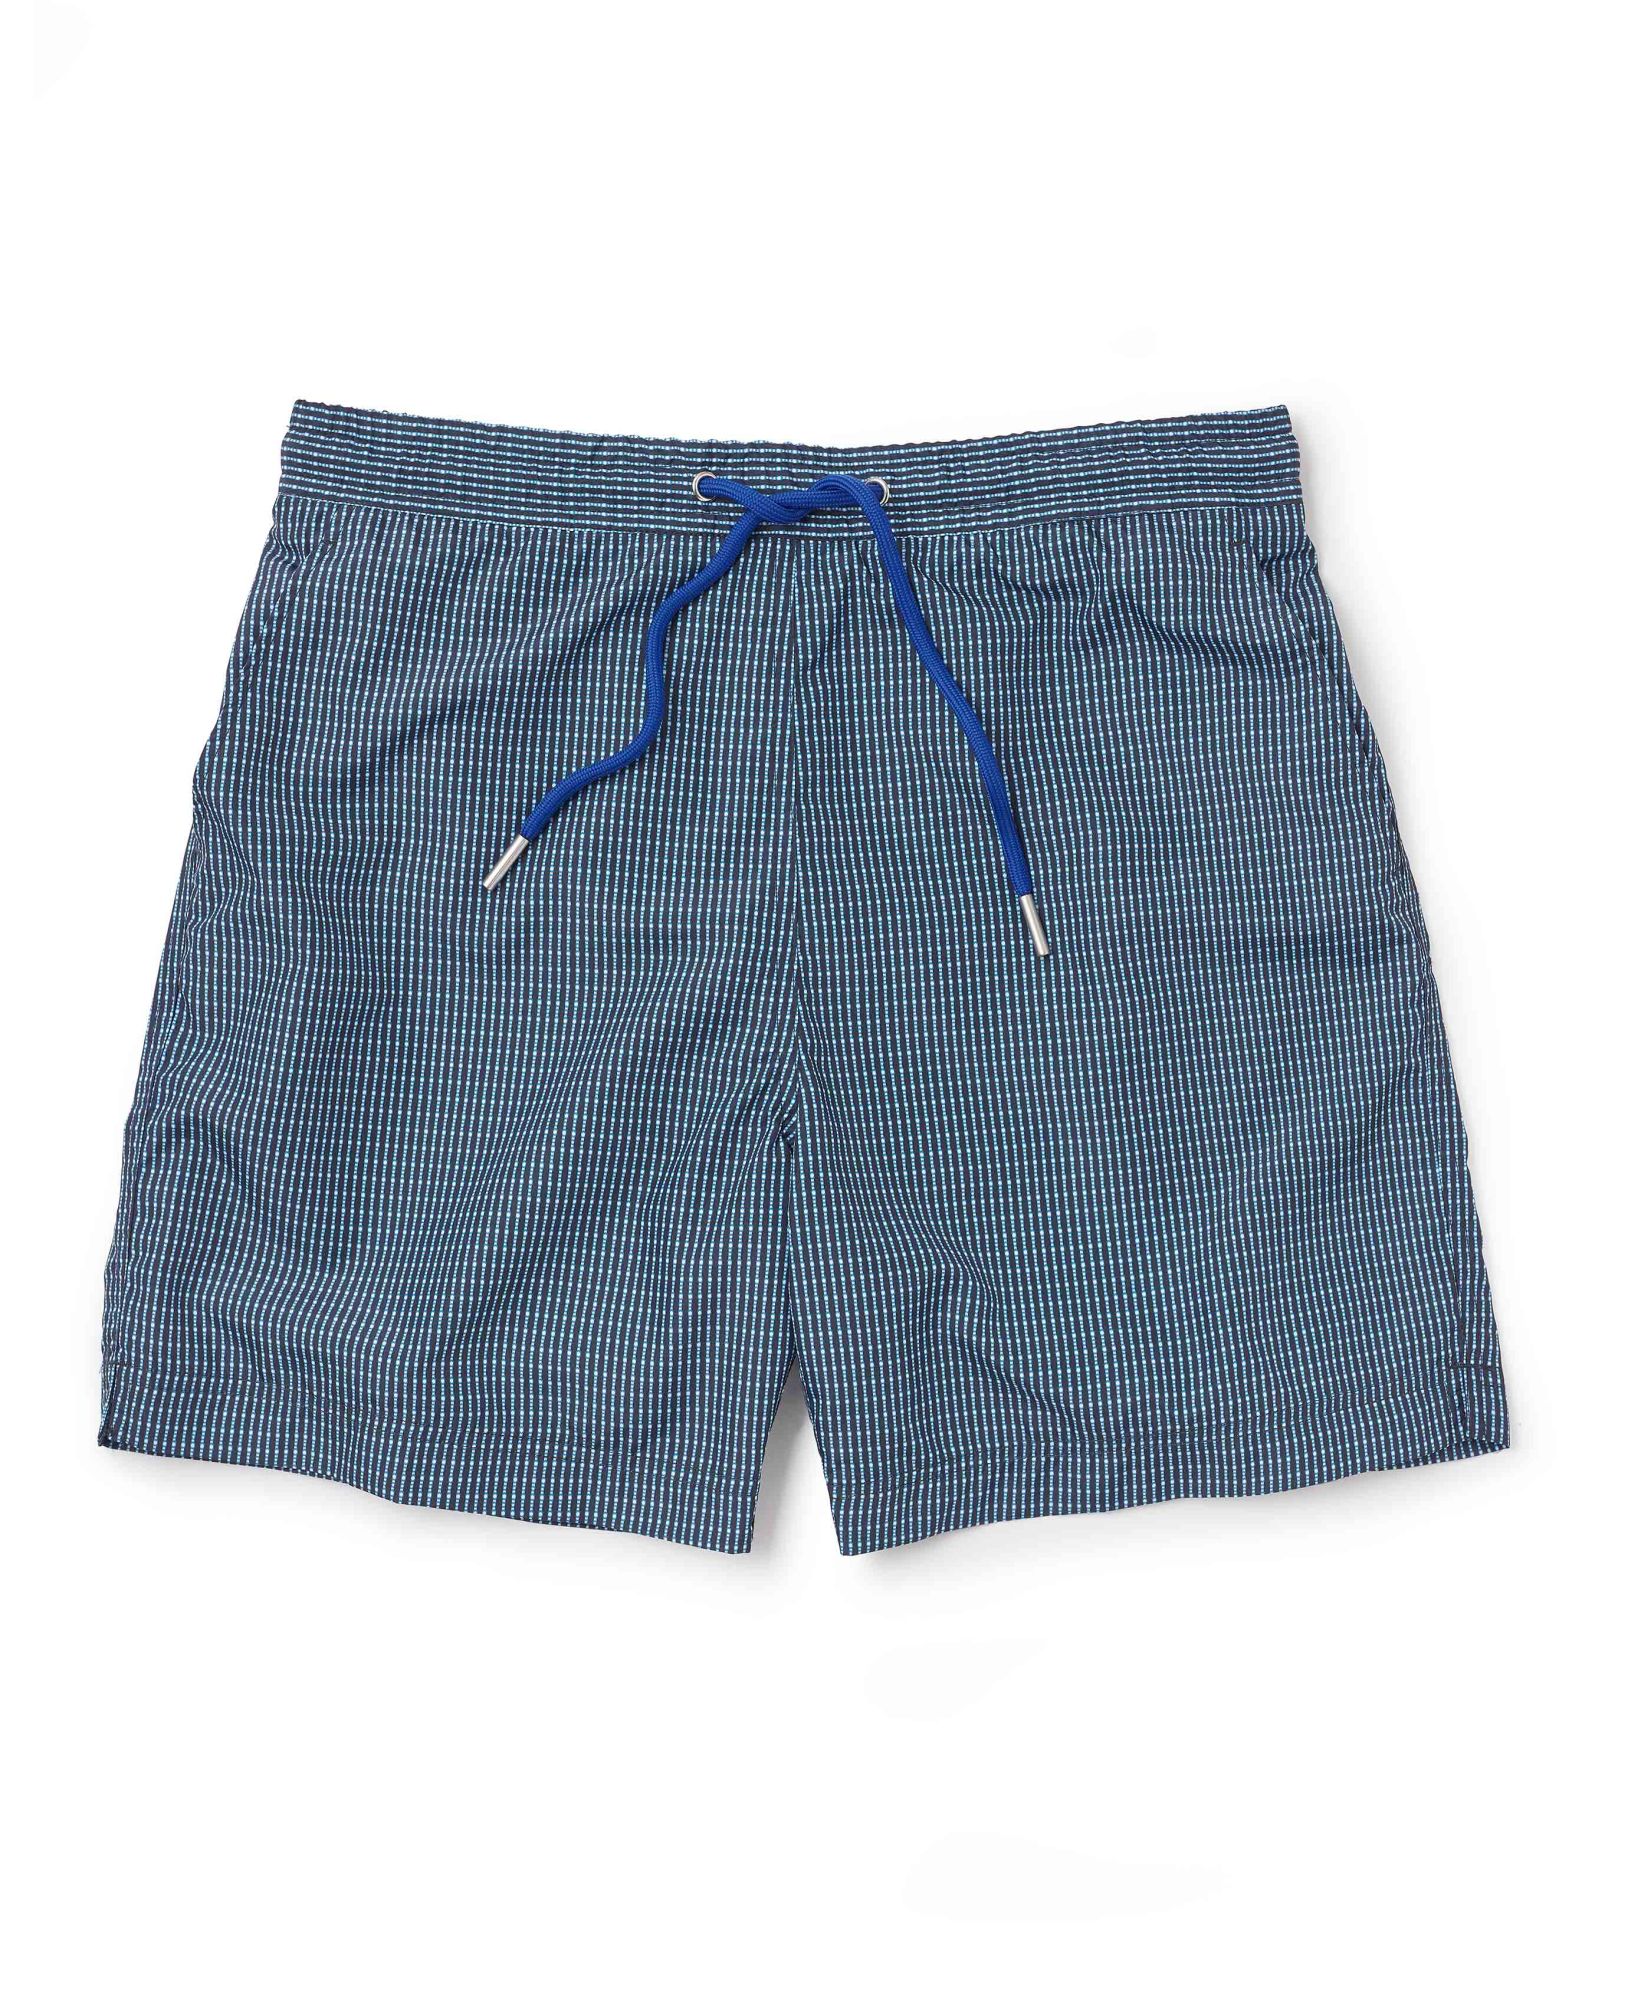 Blue Dotted Stripe Recycled Swim Shorts L